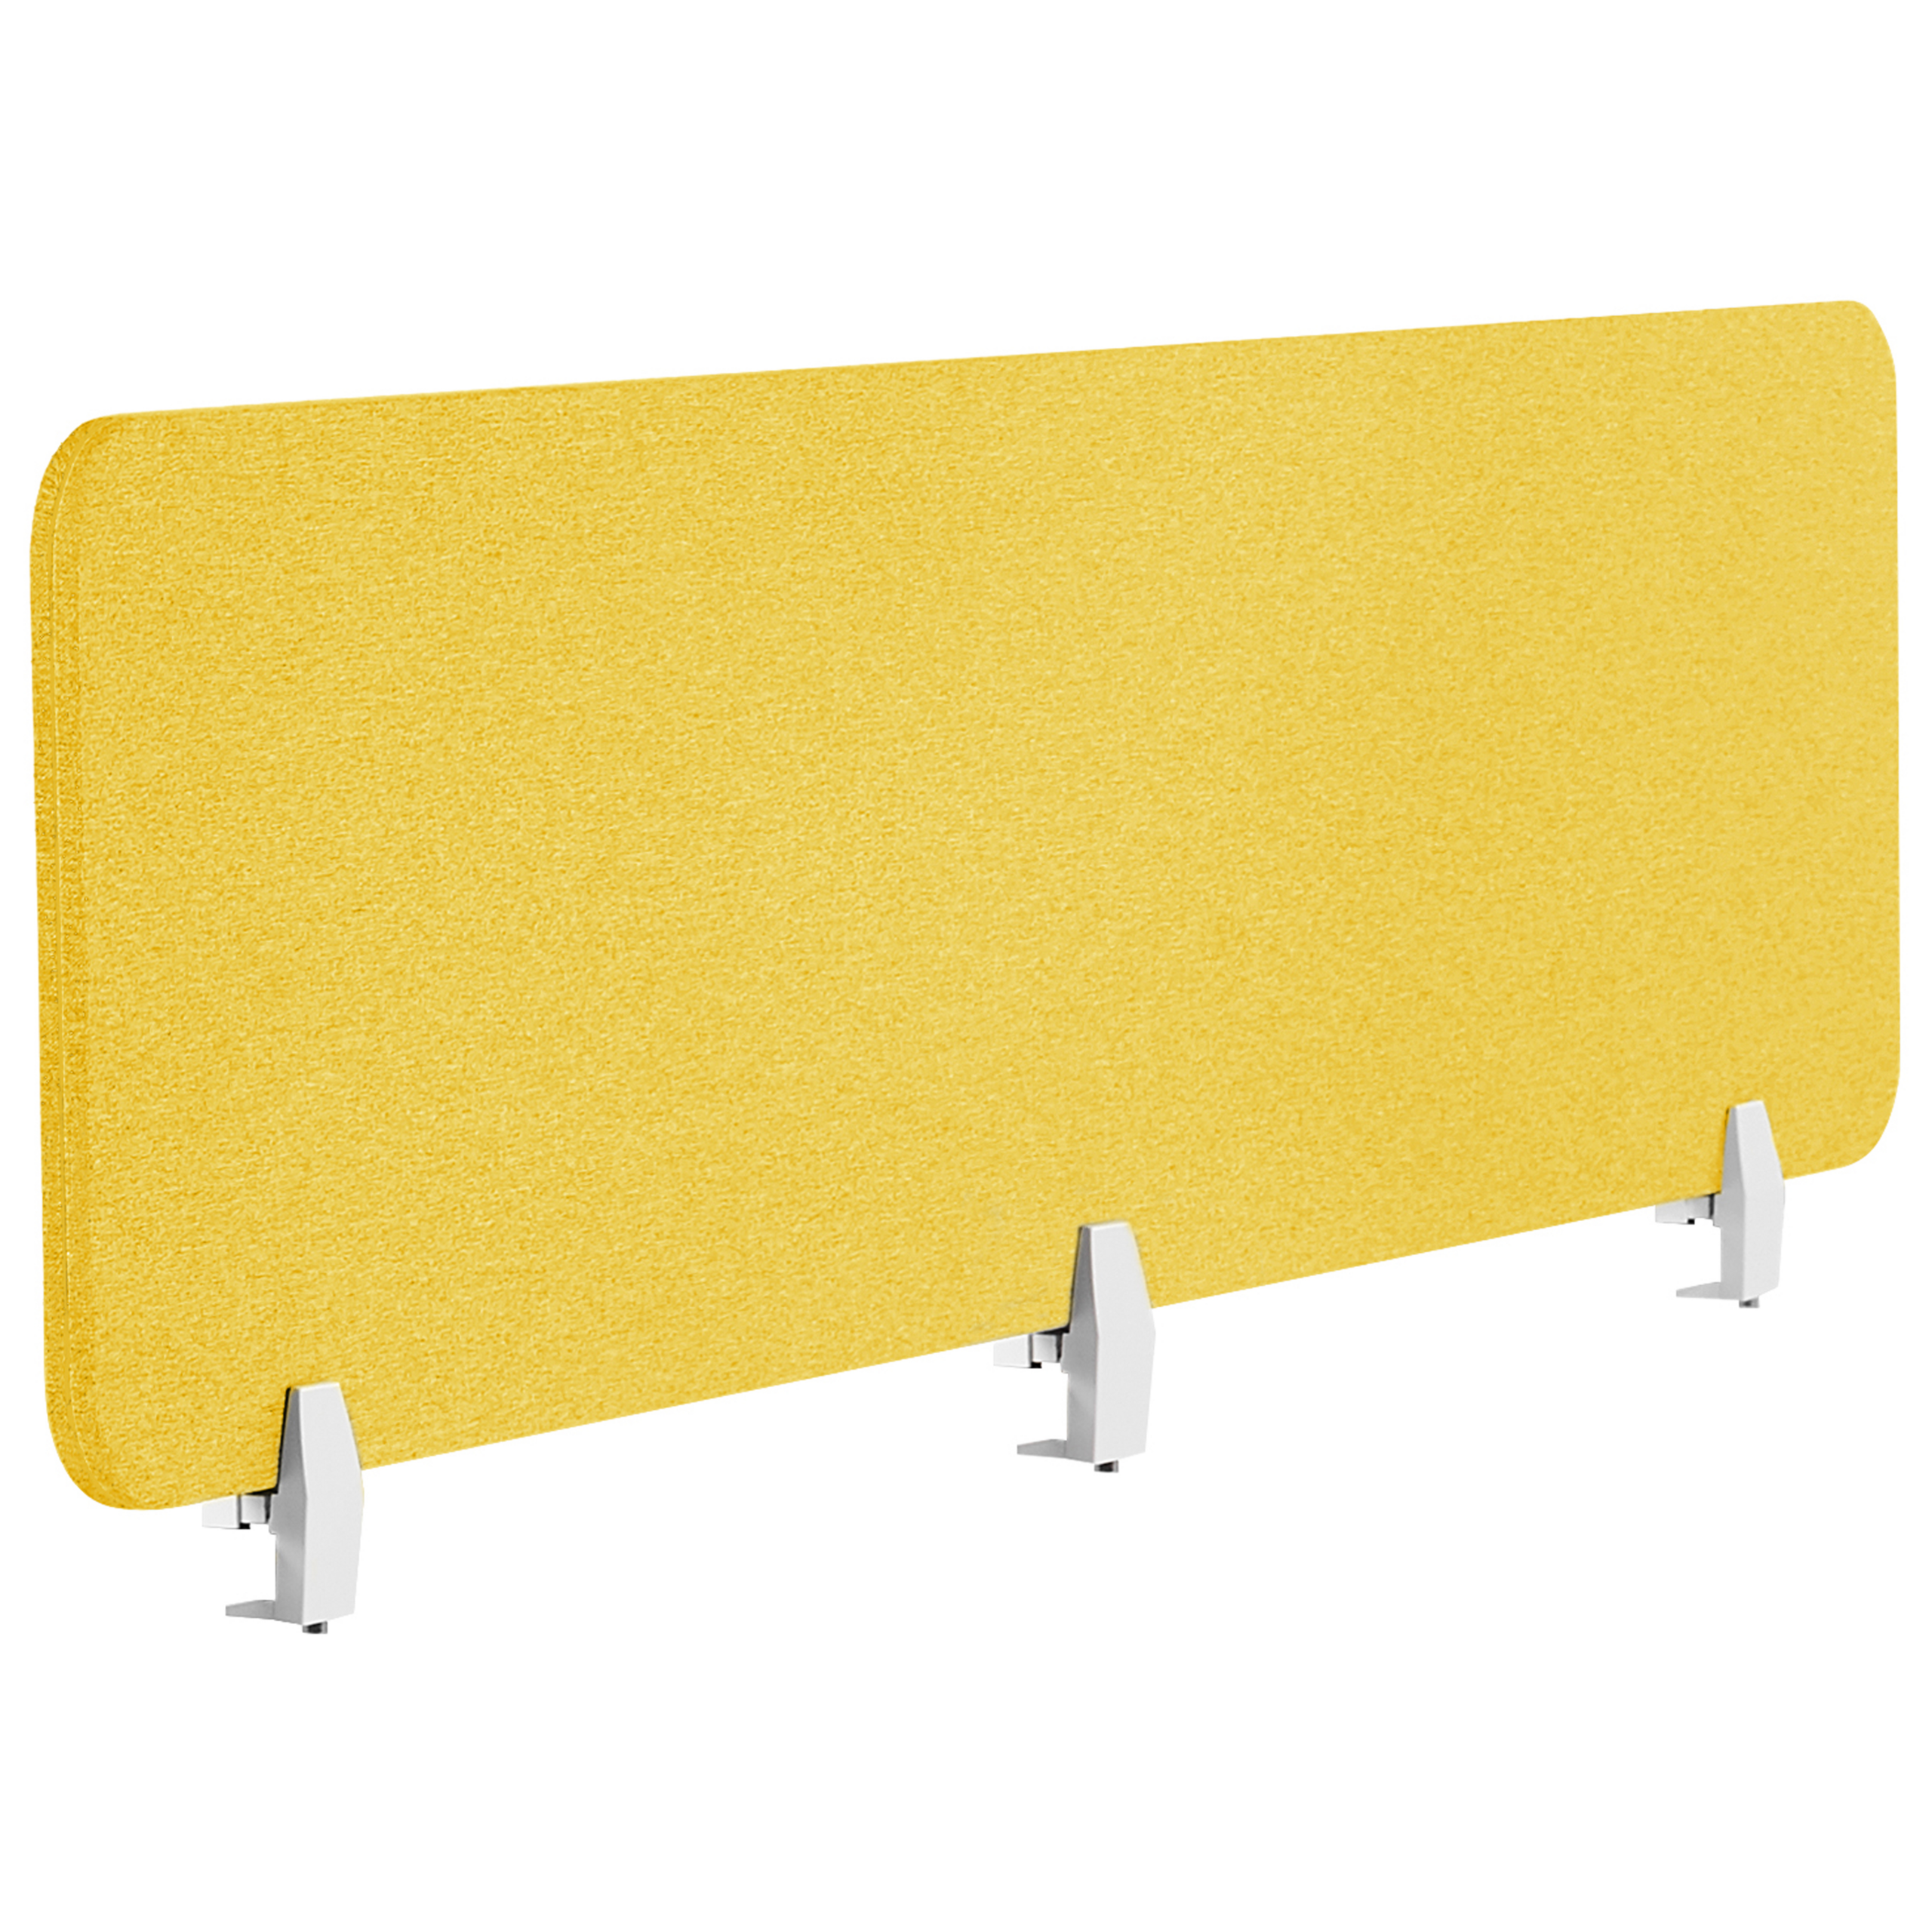 Beliani Desk Screen Yellow PET Board Fabric Cover 180 x 40 cm Acoustic Screen Modular Mounting Clamps Home Office Material:Polyester Size:2x40x180